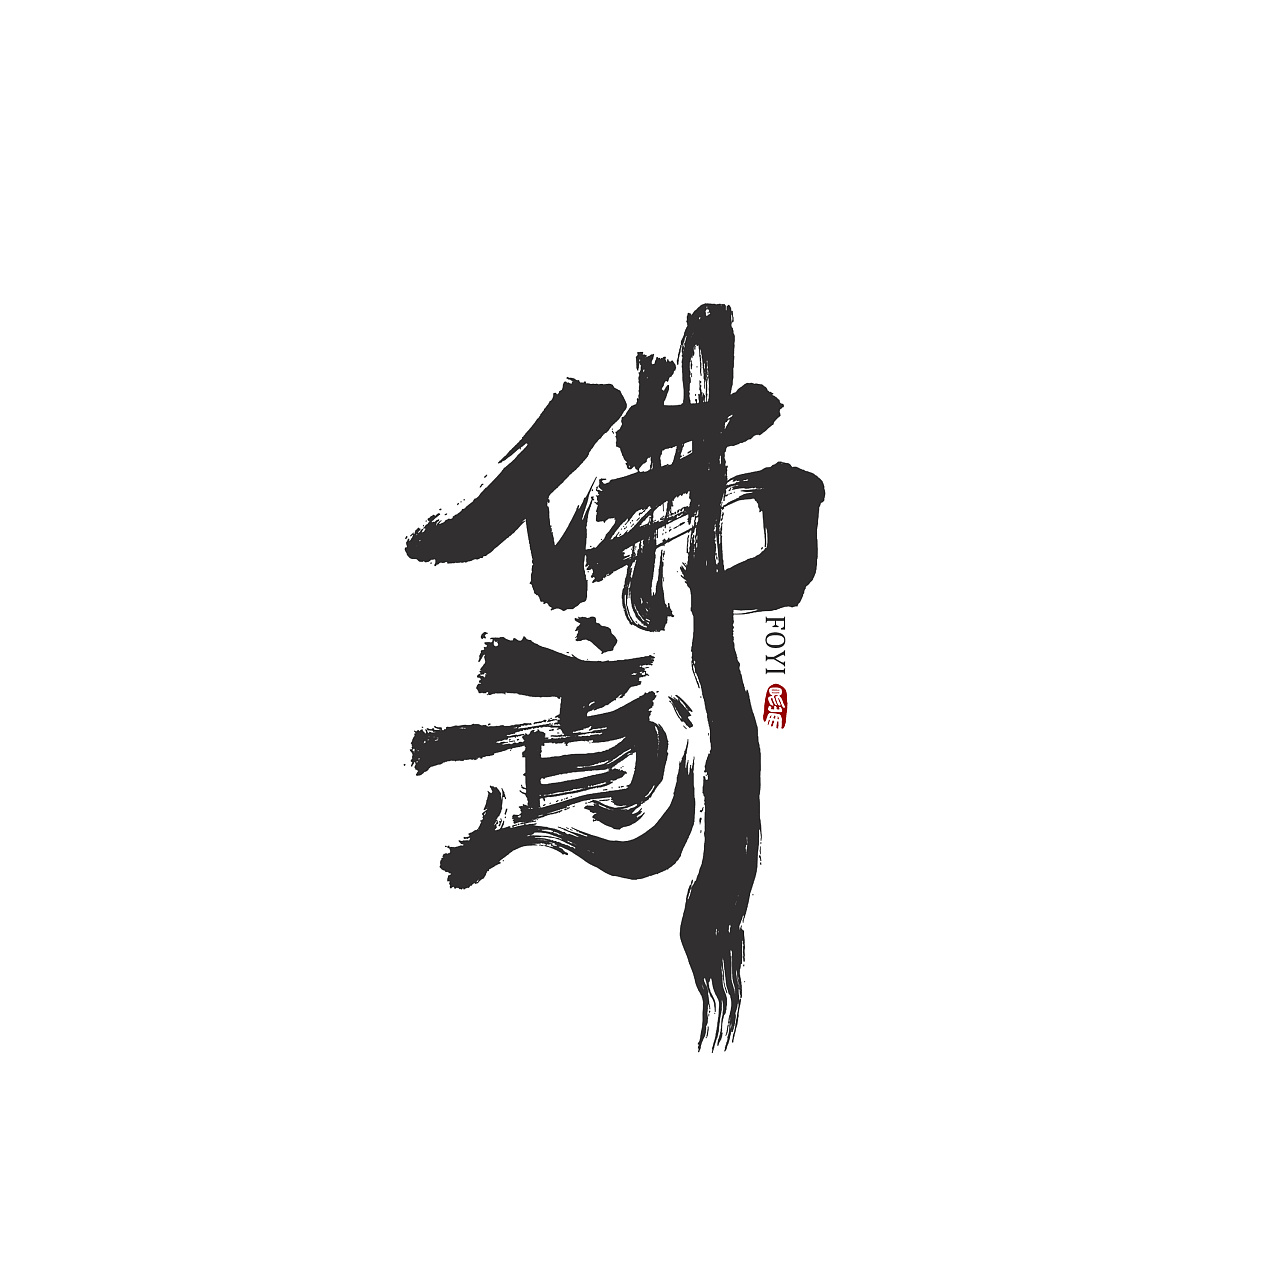 Chinese Creative Font Design-Chinese culture has a long history, and religious culture is also flourishing.